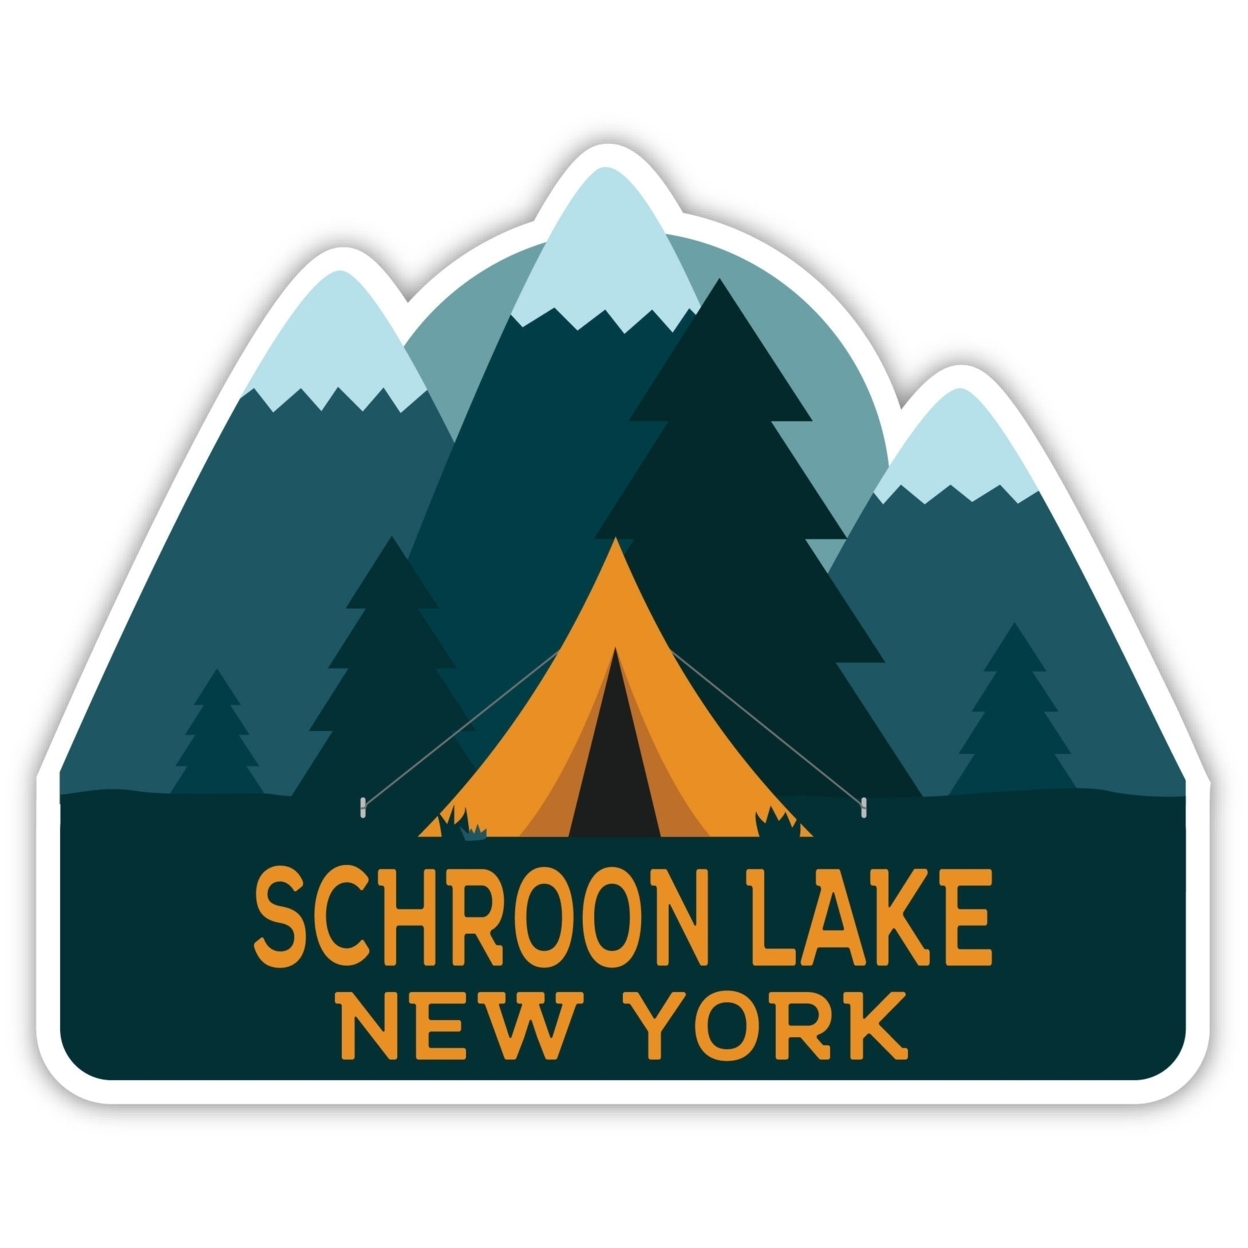 Schroon Lake New York Souvenir Decorative Stickers (Choose Theme And Size) - Single Unit, 4-Inch, Great Outdoors